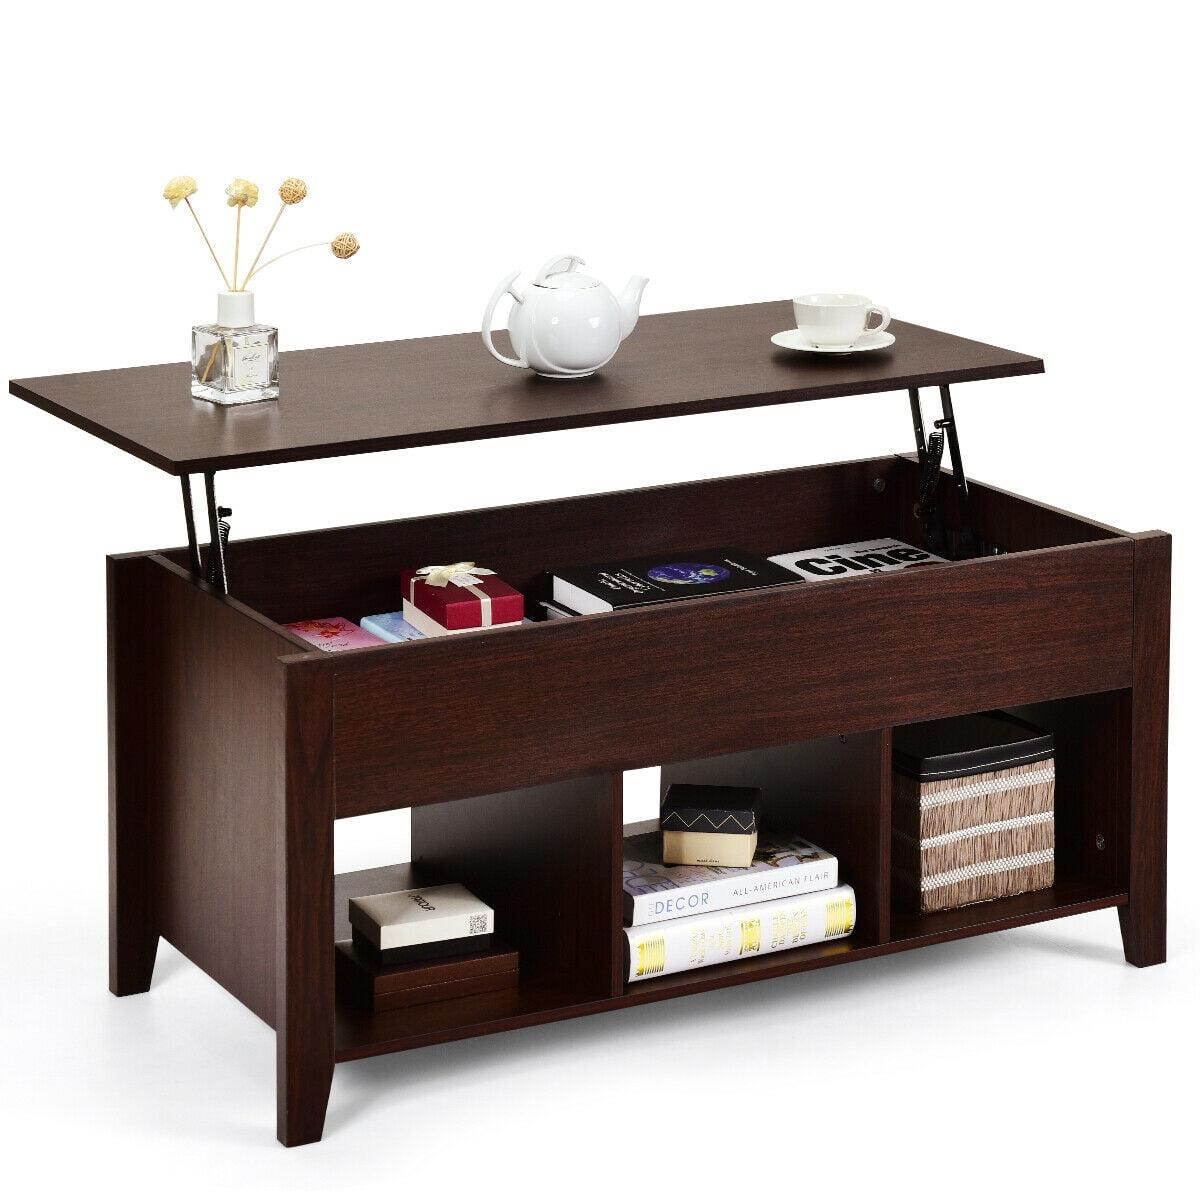 Elevate Wood & Metal Rectangular Coffee Table with Lift-Top Storage